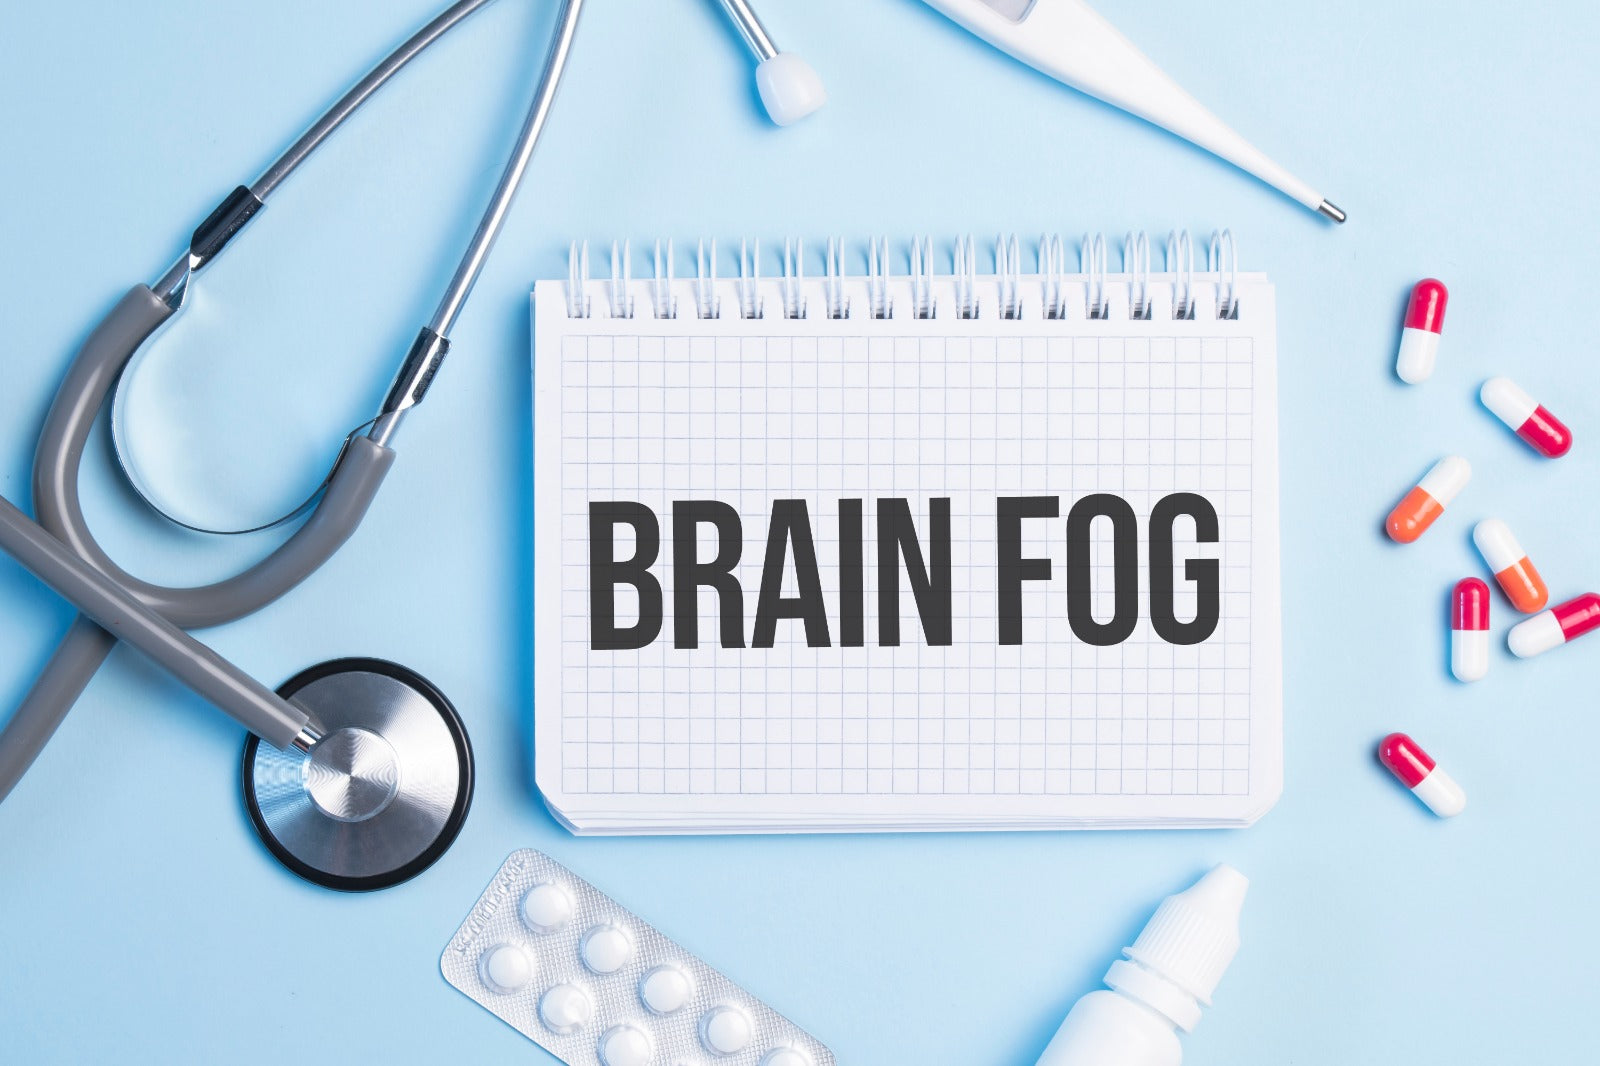 The #1 Most Overlooked Cause Of Brain Fog And Forgetfulness